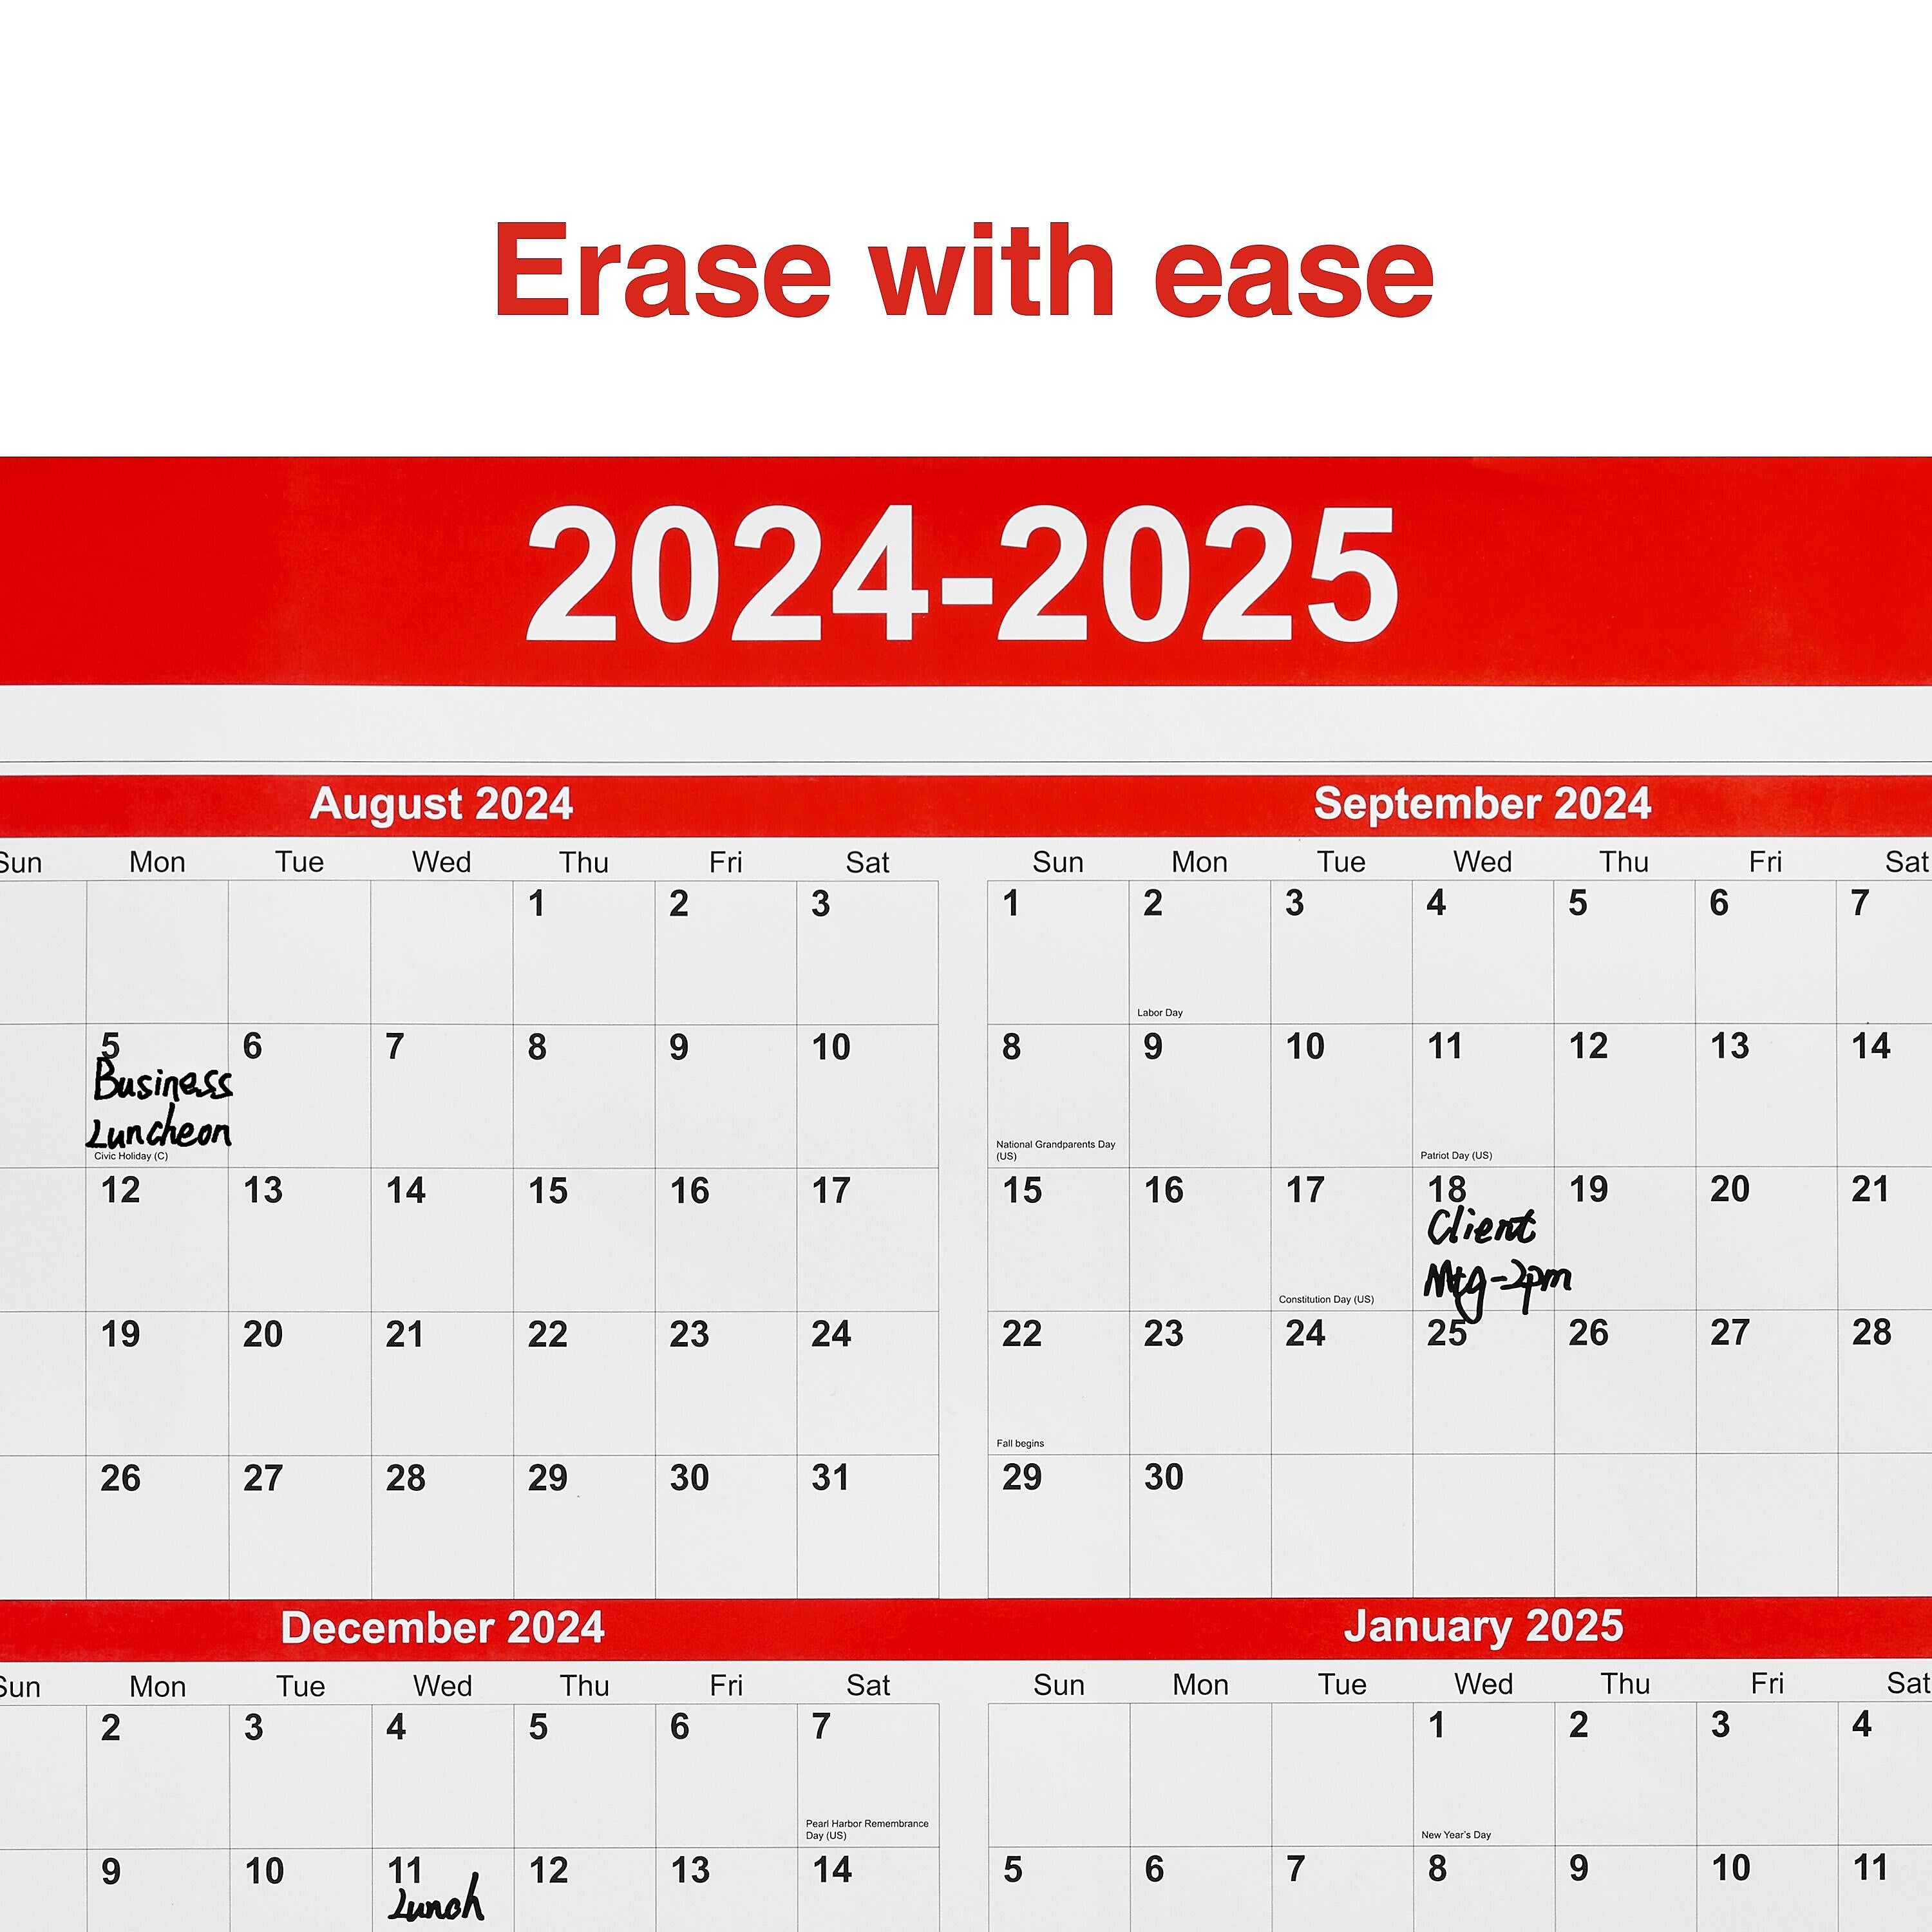 2024-2025 Staples 32" x 48" Academic Yearly Dry-Erase Wall Calendar, Red/White